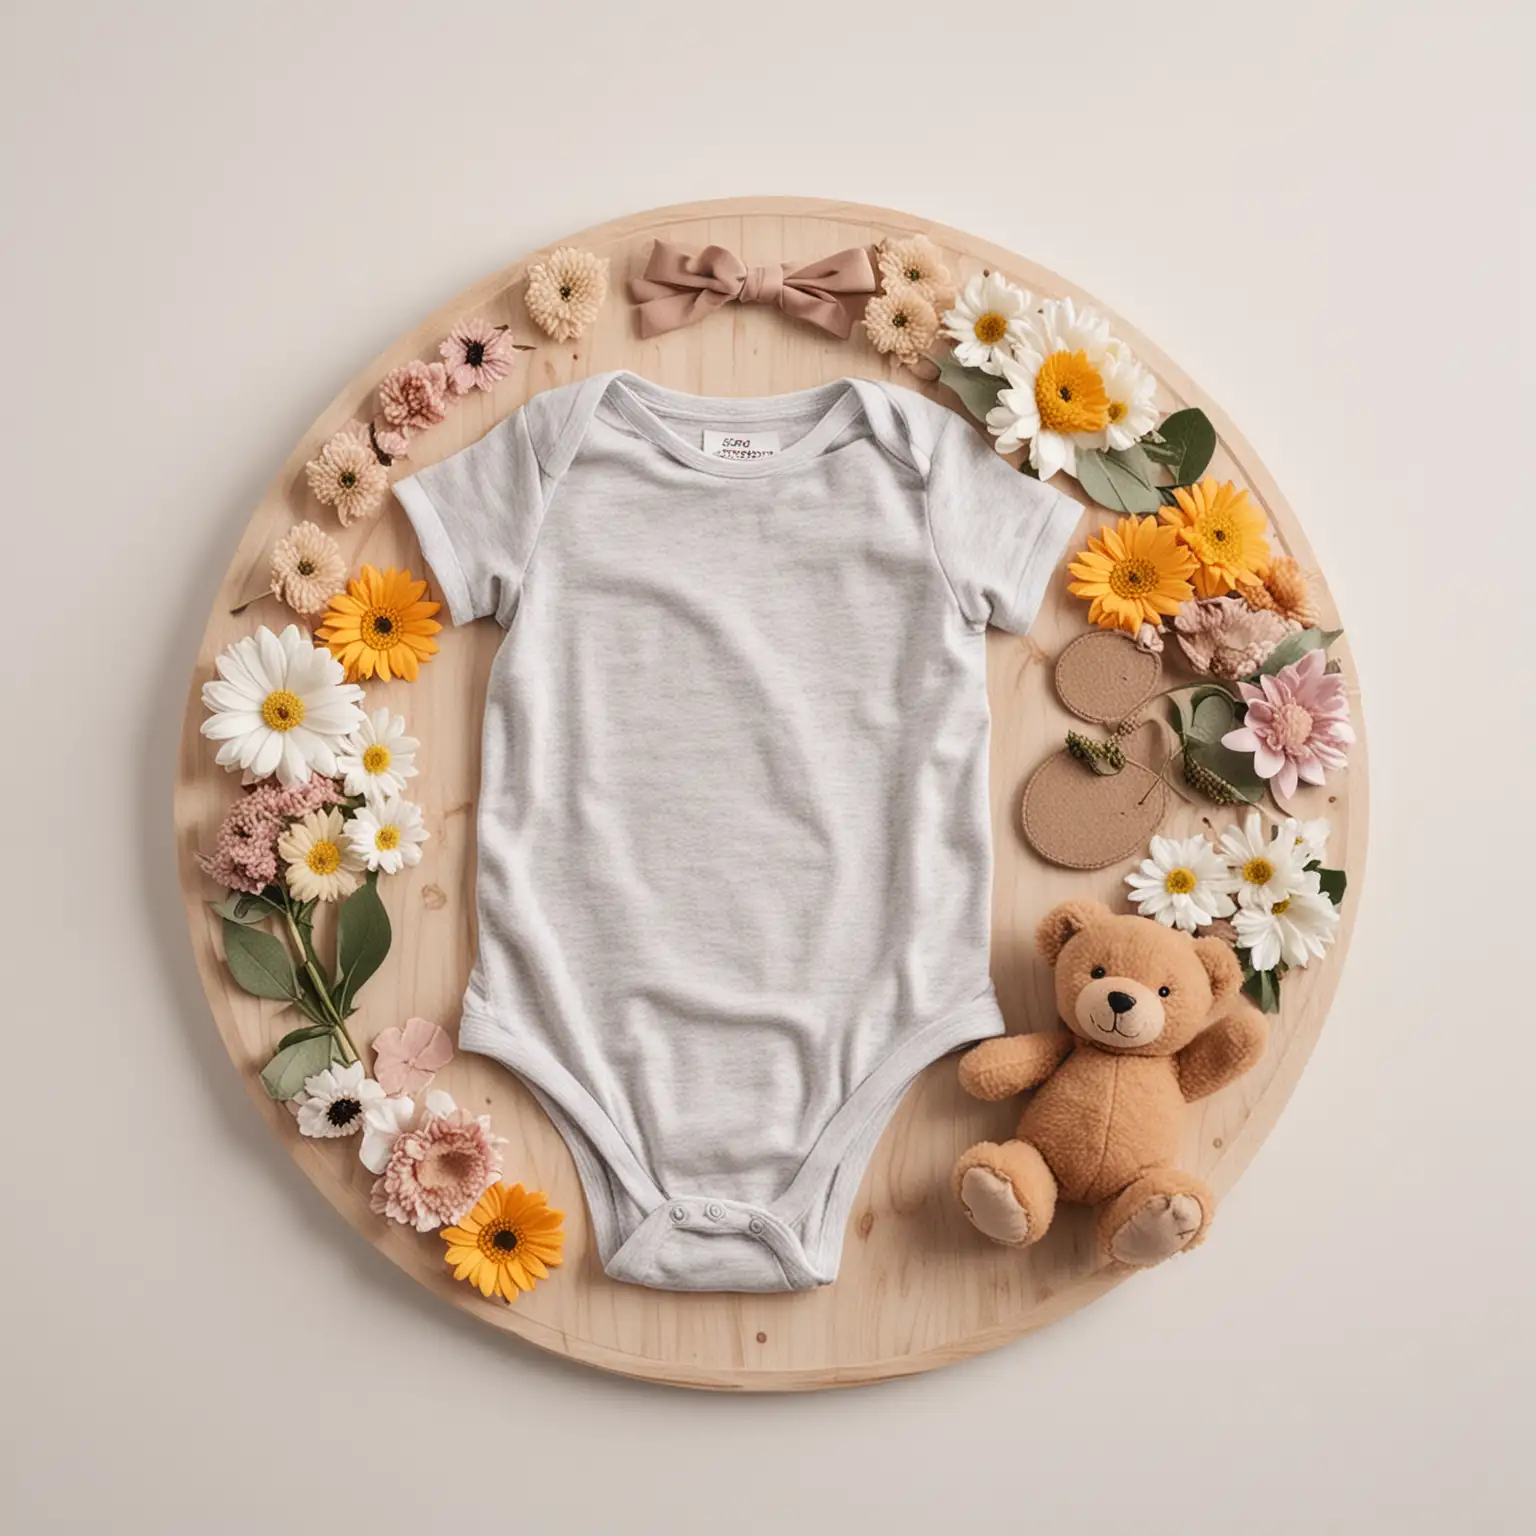 Baby Announcement Onesie with Teddy Bear and Flowers on White Background